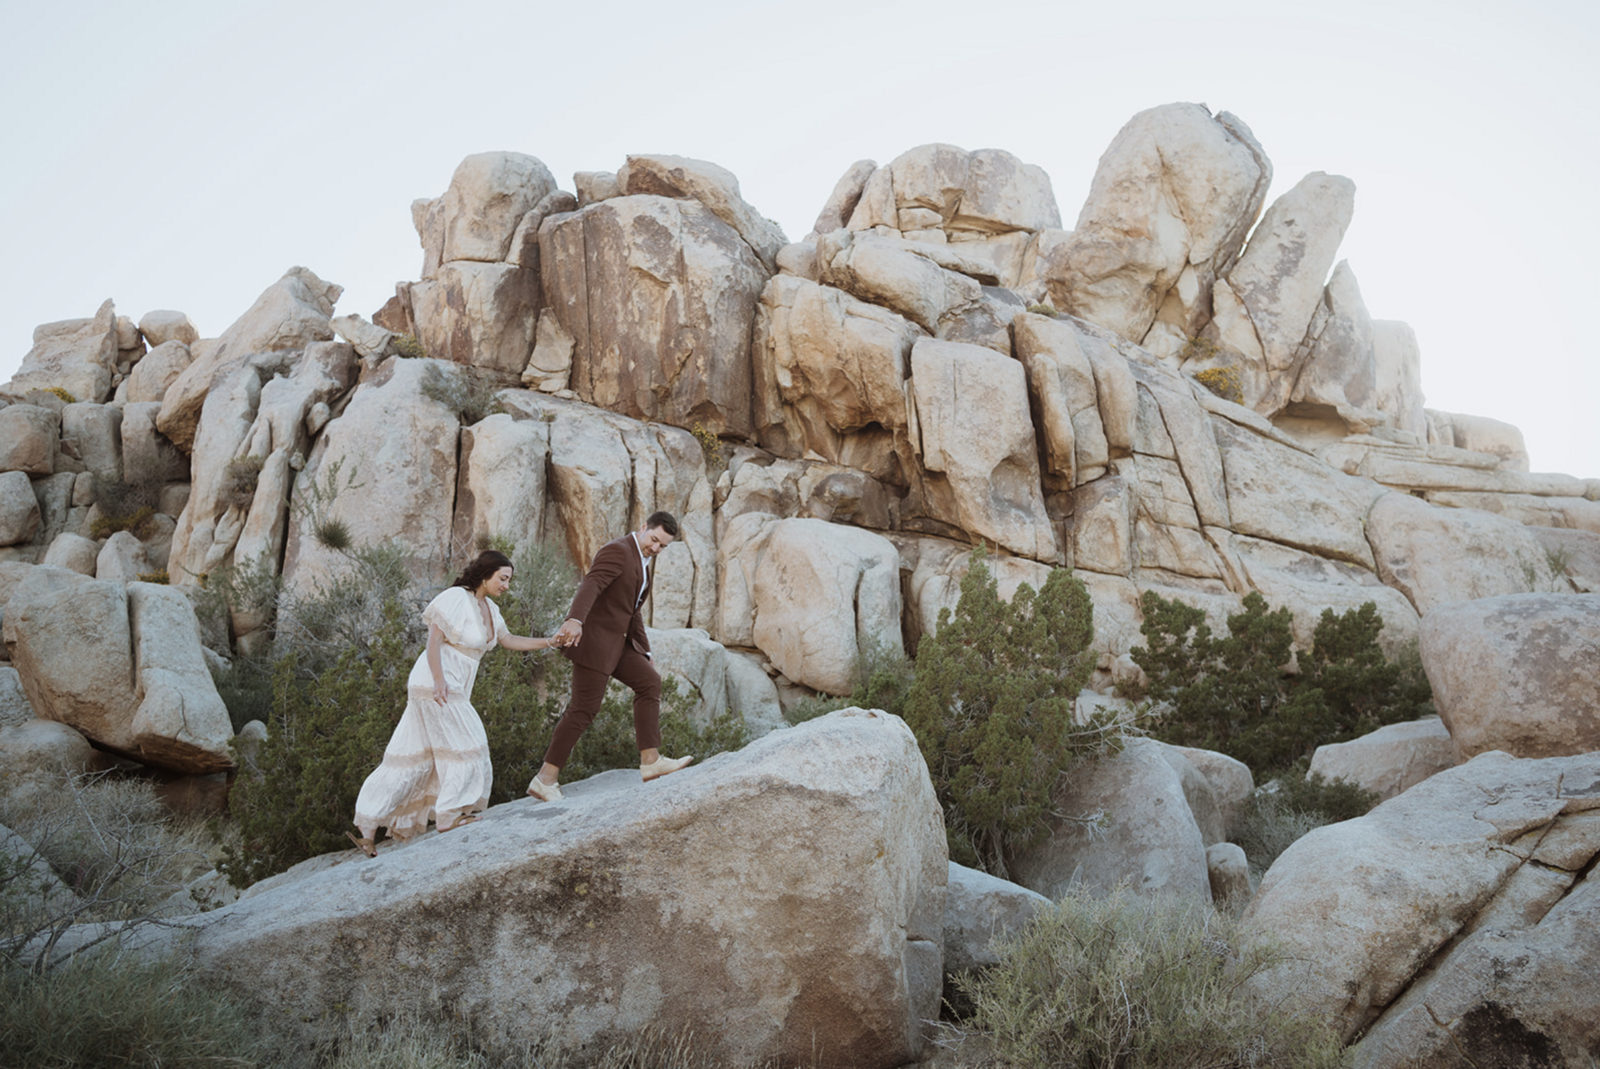 the bride is getting lead by the groom up a rock. they are hiking in their wedding attire - the groom is in a maroon suit and the bride is in a white and tan dress. they are surrounded by rocks and bushes. the sun is setting behind them so it's shaded.